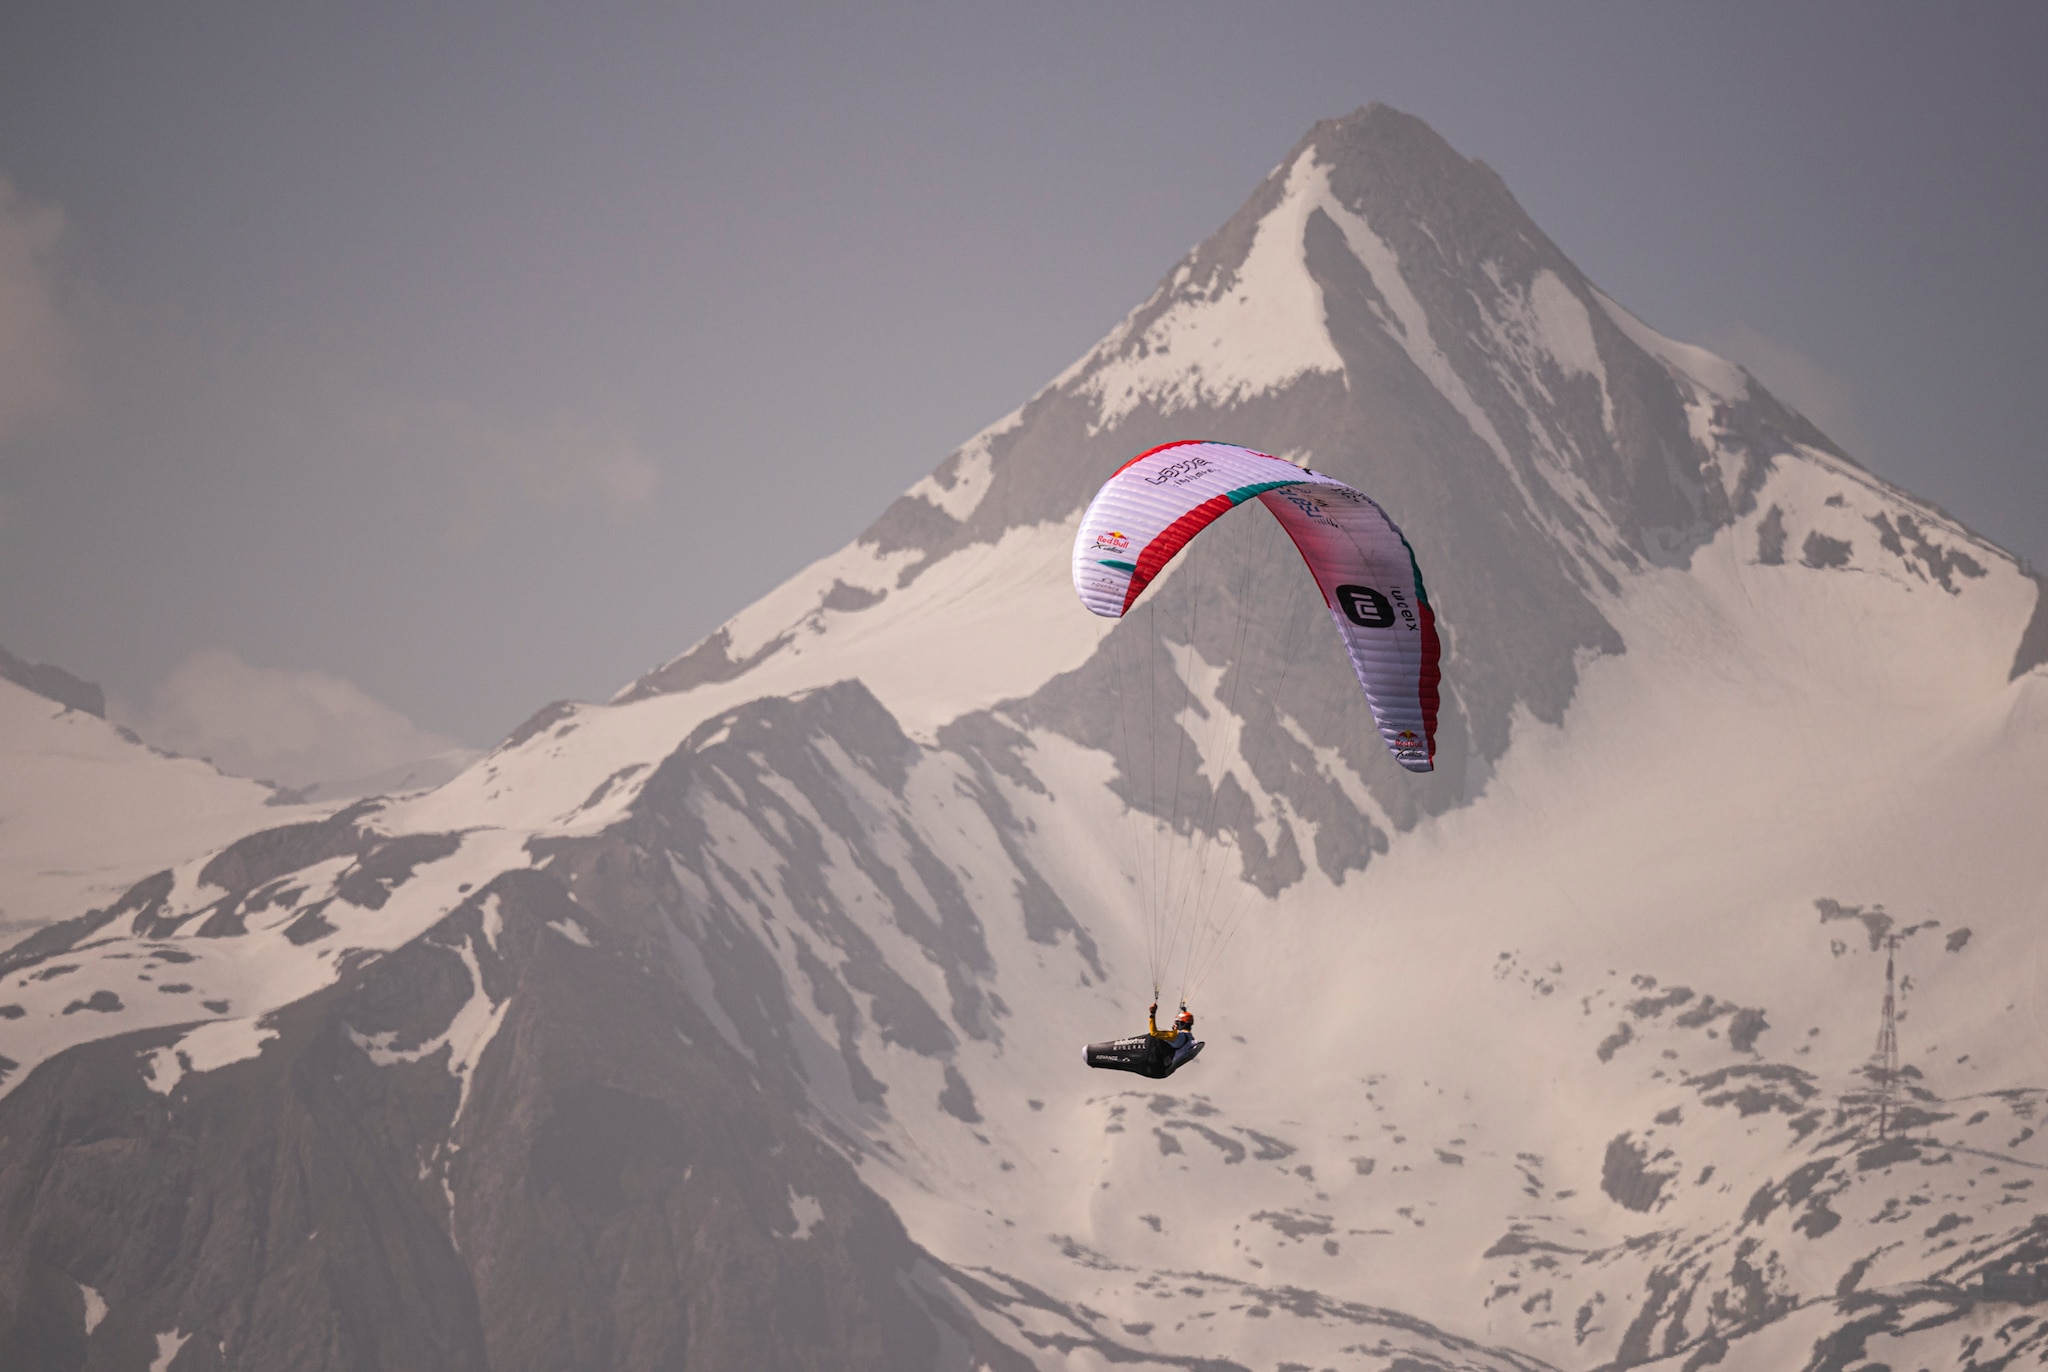 Chrigl Maurer (SUI1) races in front of the Kitzsteinhorn prior to the Red Bull X-Alps in Salzburg on June 21, 2021.